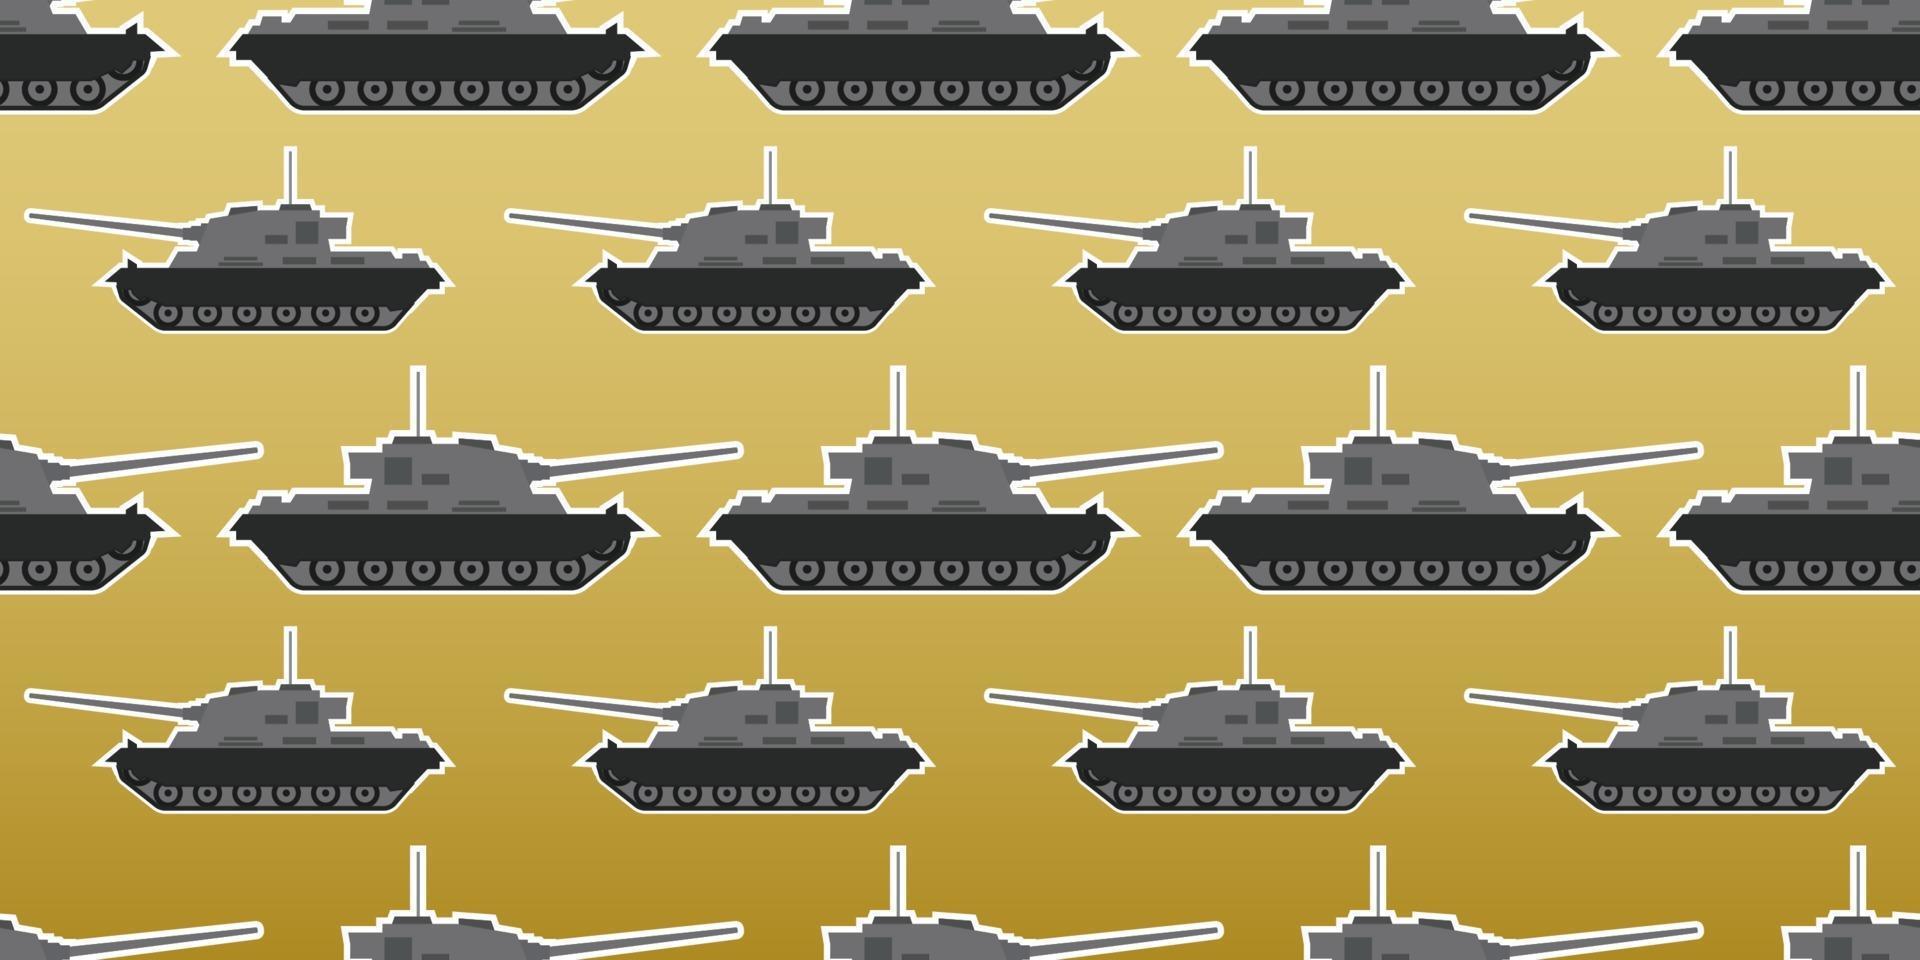 Seamless vector pattern of Military tank isolated on desert color gradation background.